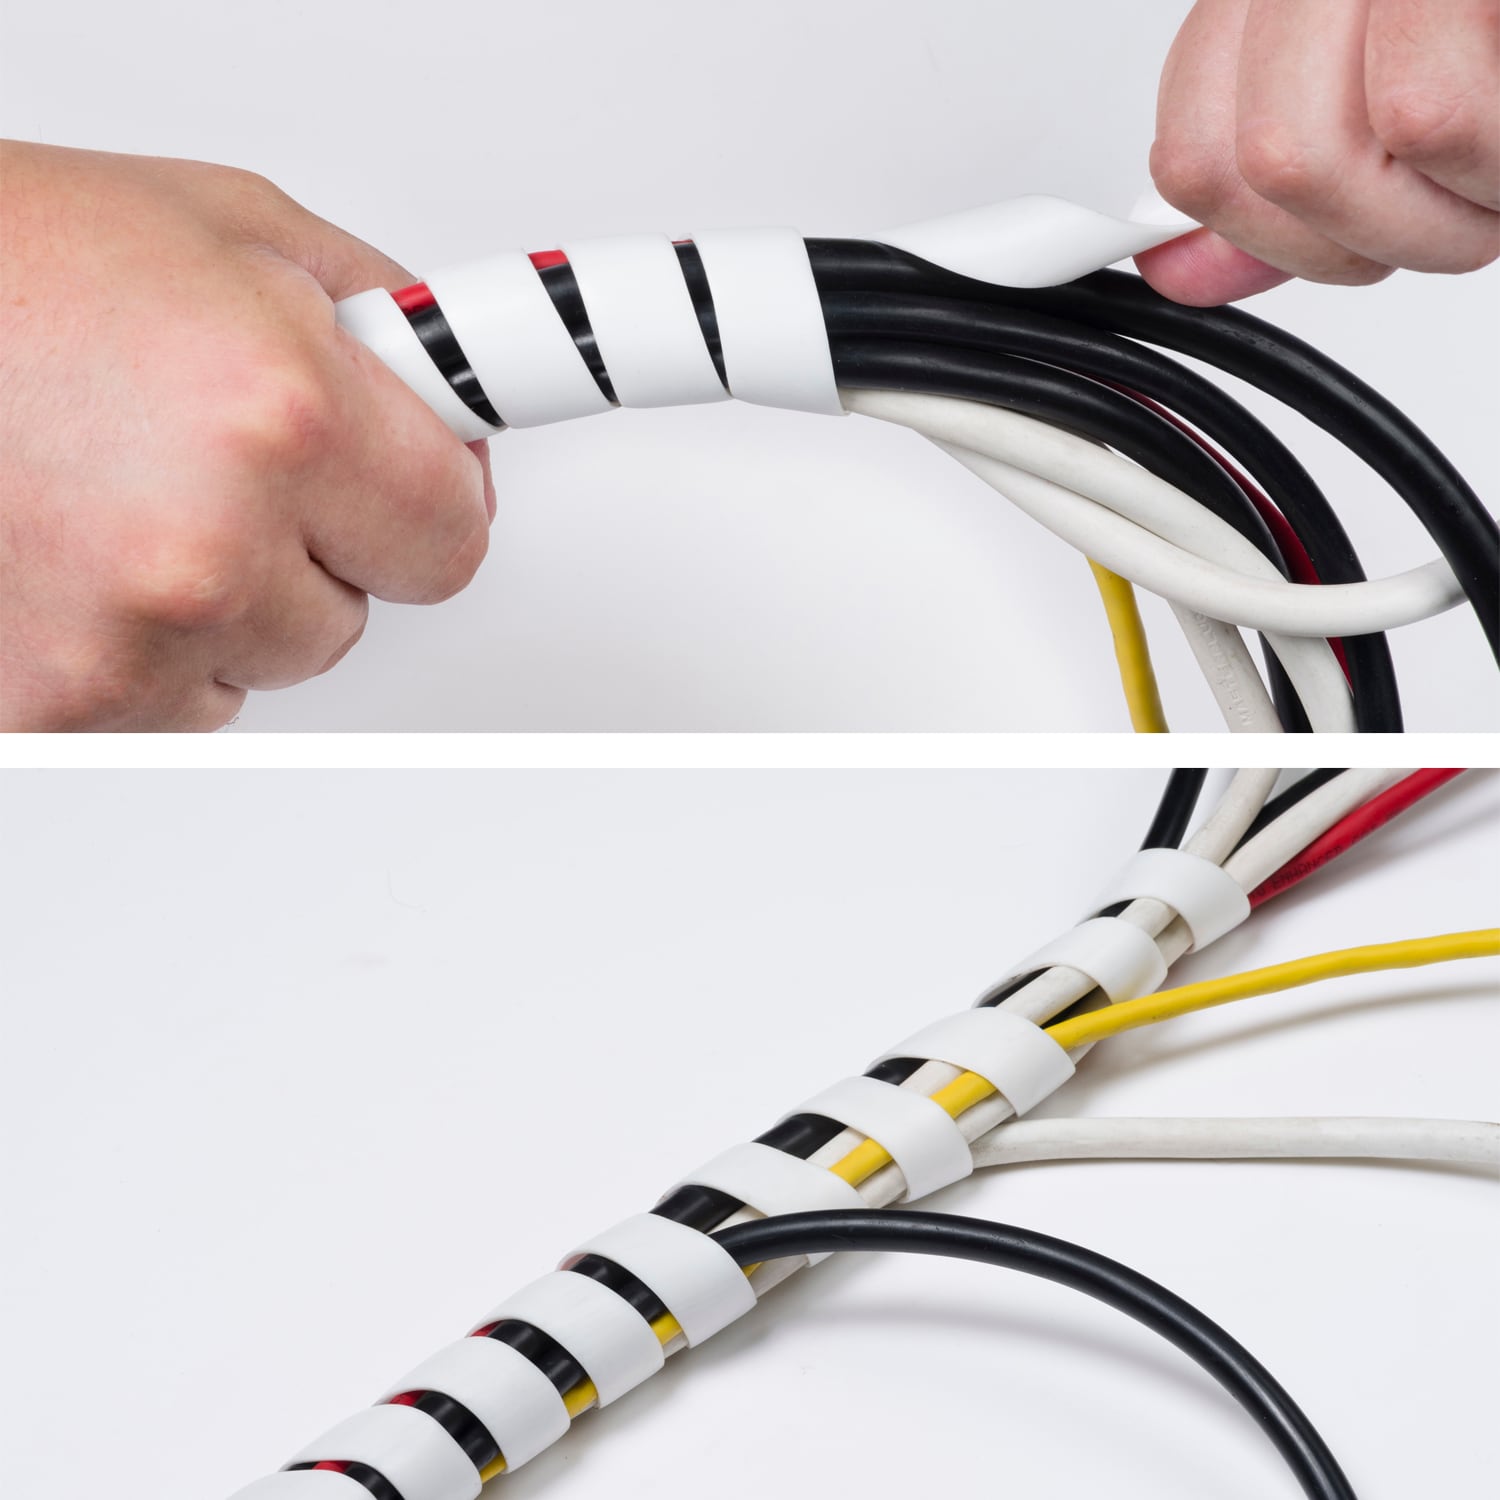 Details about   Spiral Tube Wrap Cable Management Sleeve 13mmx15mm 2 Meters Long White 